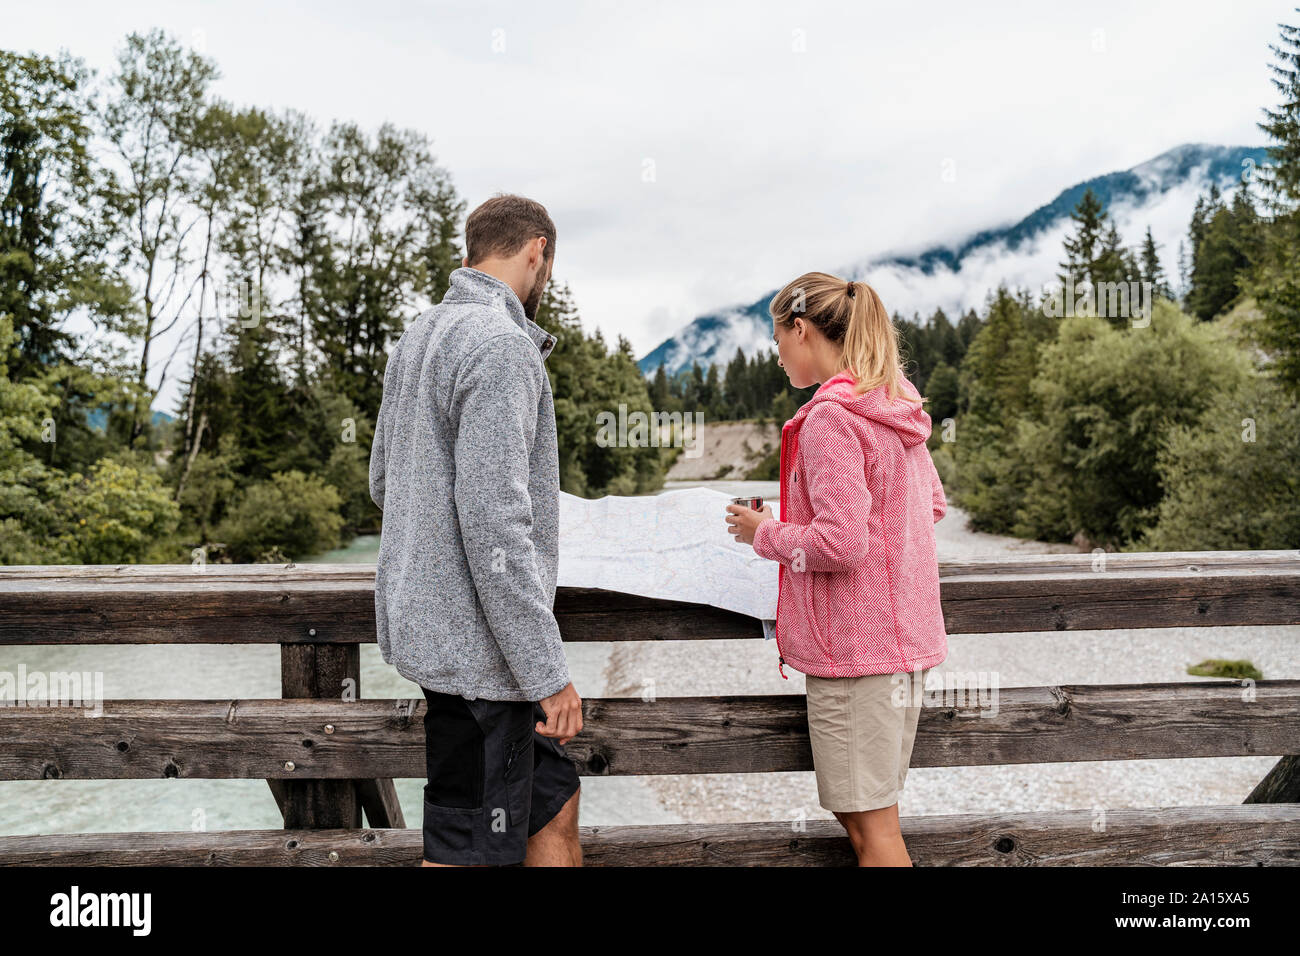 Young couple on a hiking trip reading map on wooden bridge, Vorderriss, Bavaria, Germany Stock Photo